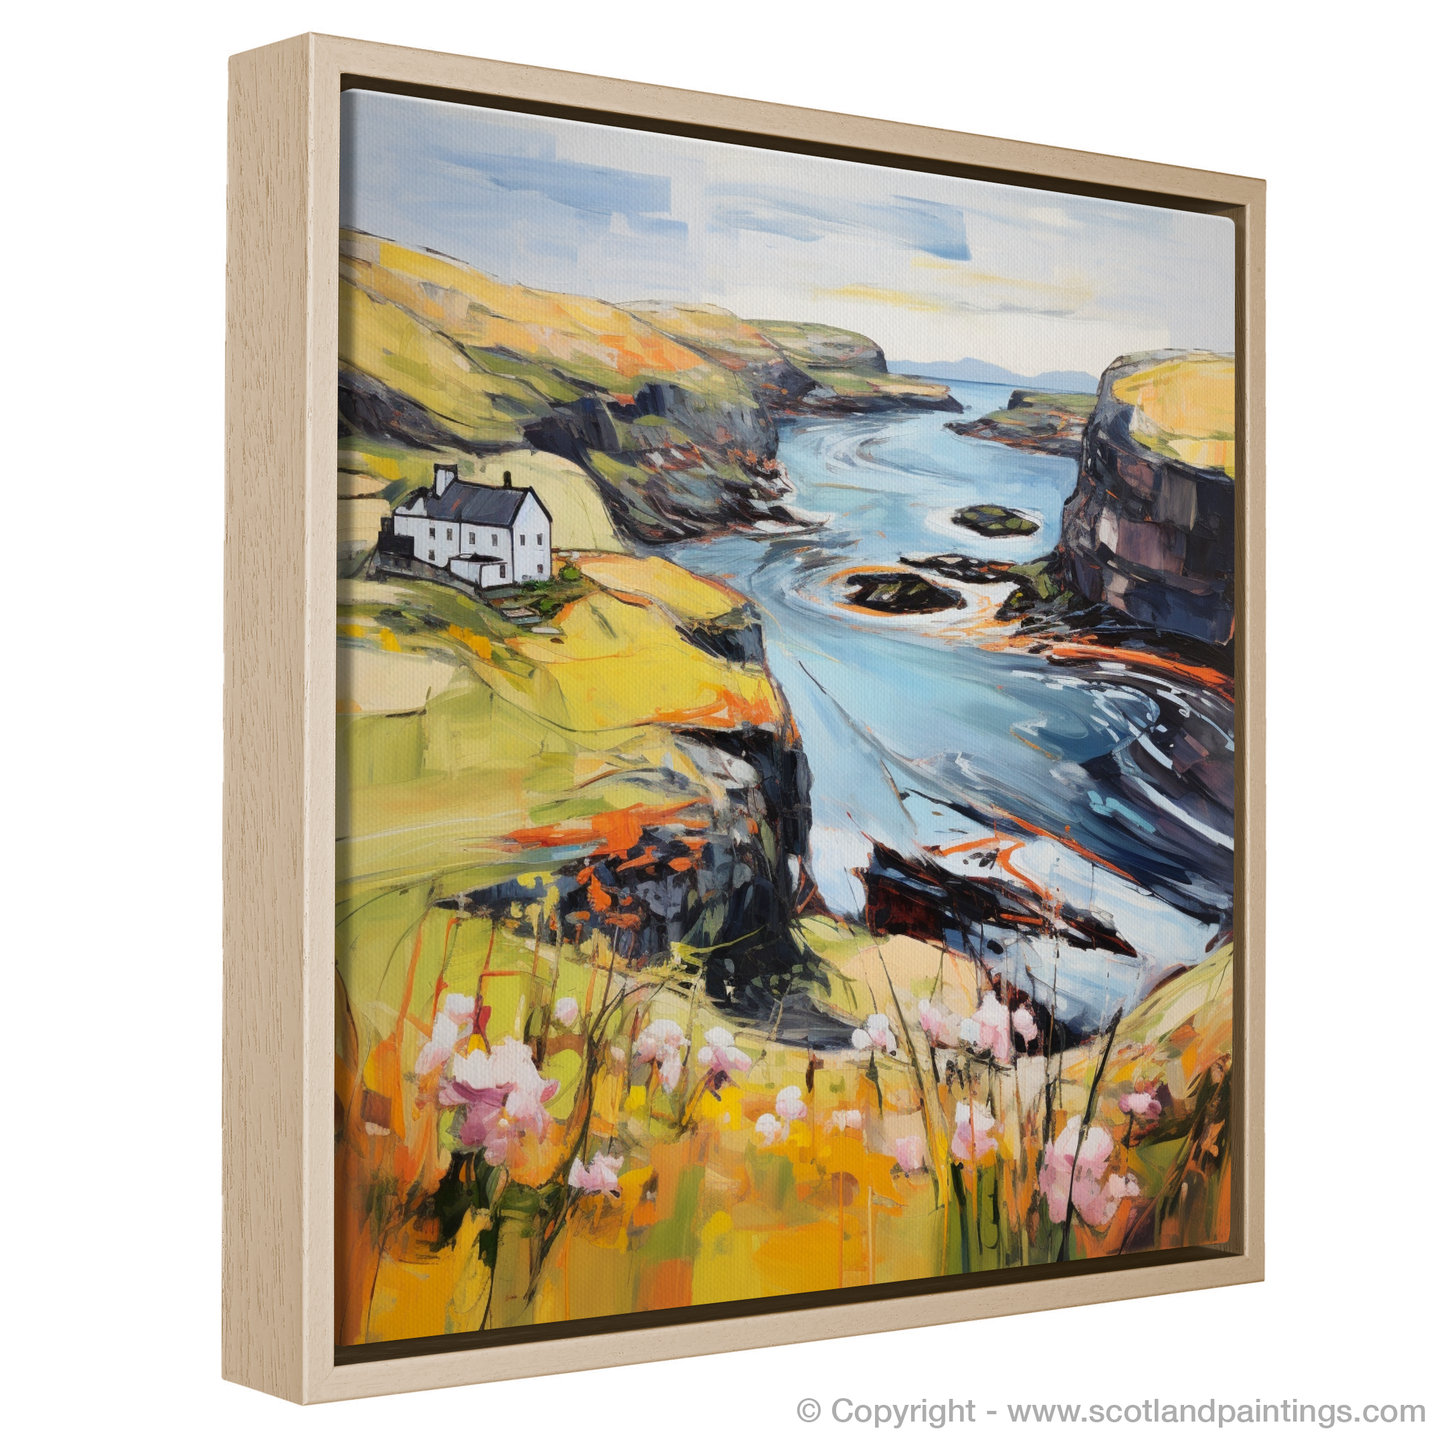 Painting and Art Print of Shetland, North of mainland Scotland in summer entitled "Summer Serenity in Shetland - A Contemporary Coastal Canvas".